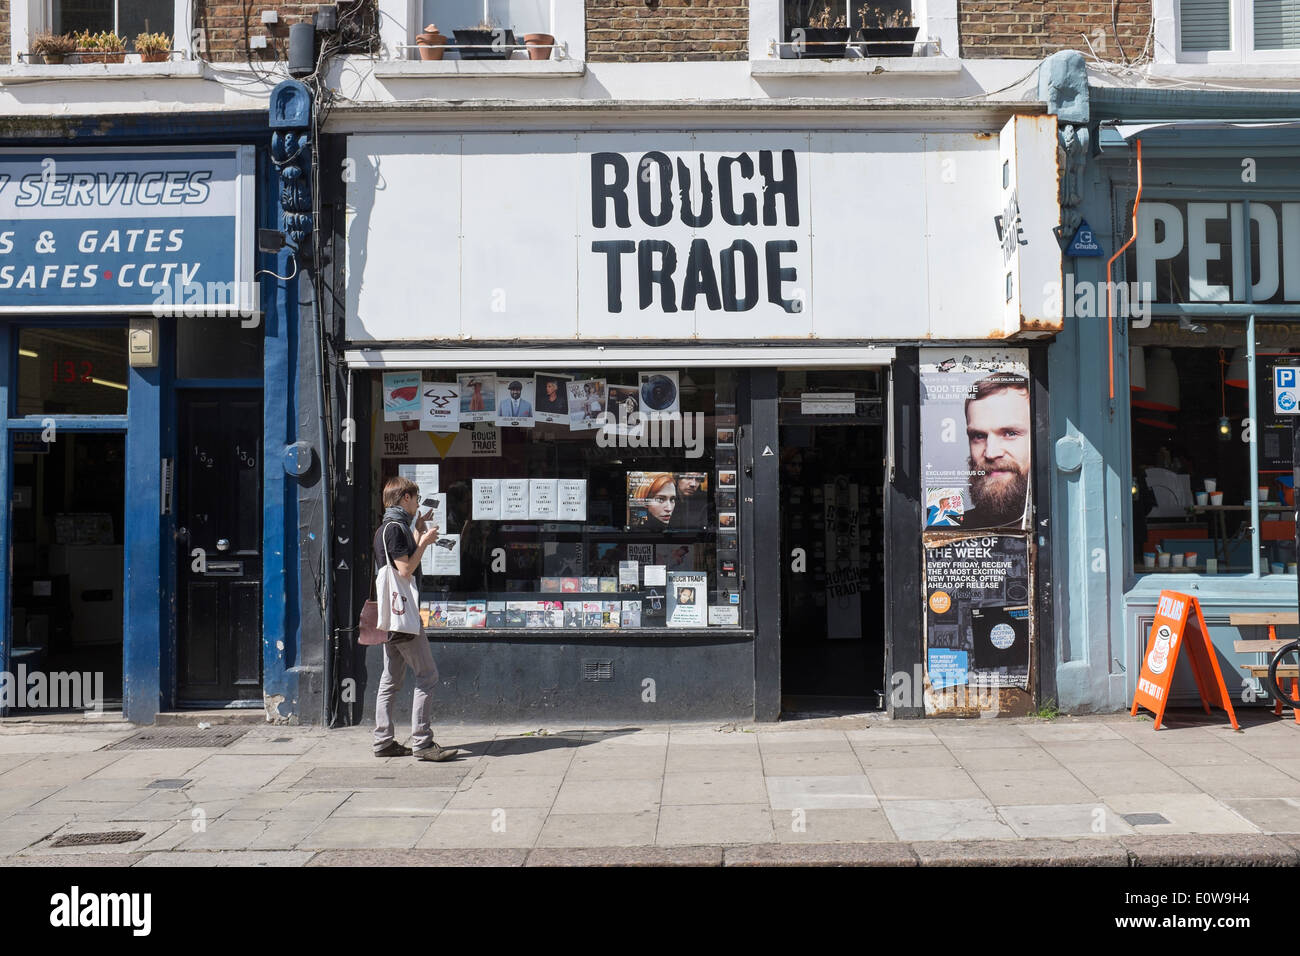 Rough Trade West Record Shop Notting Hill London Stock Photo - Alamy